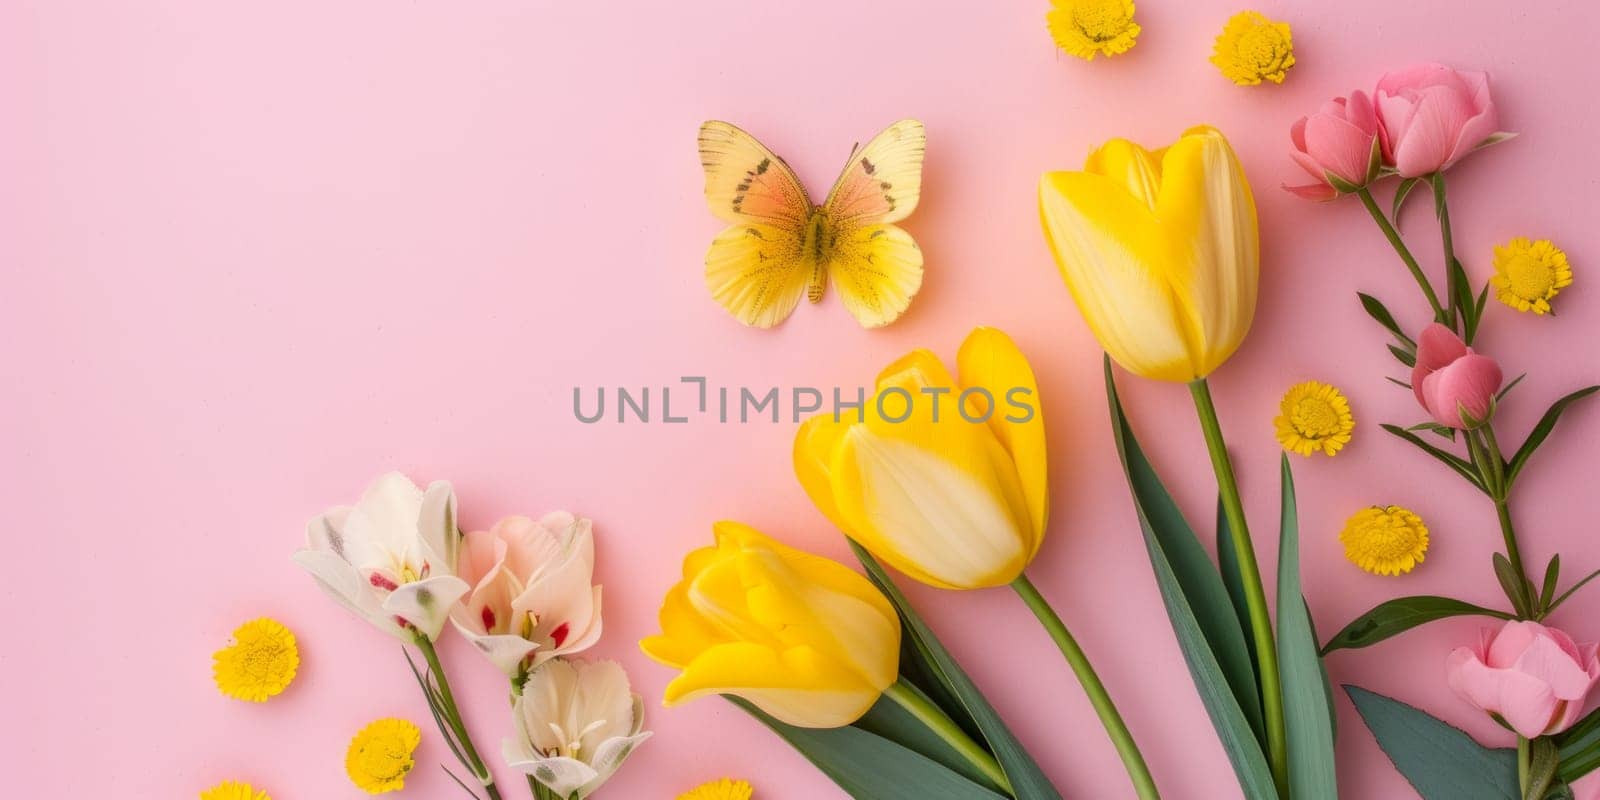 Easter spring flower background with fresh yellow flowers and butterflies isolated on pink background.